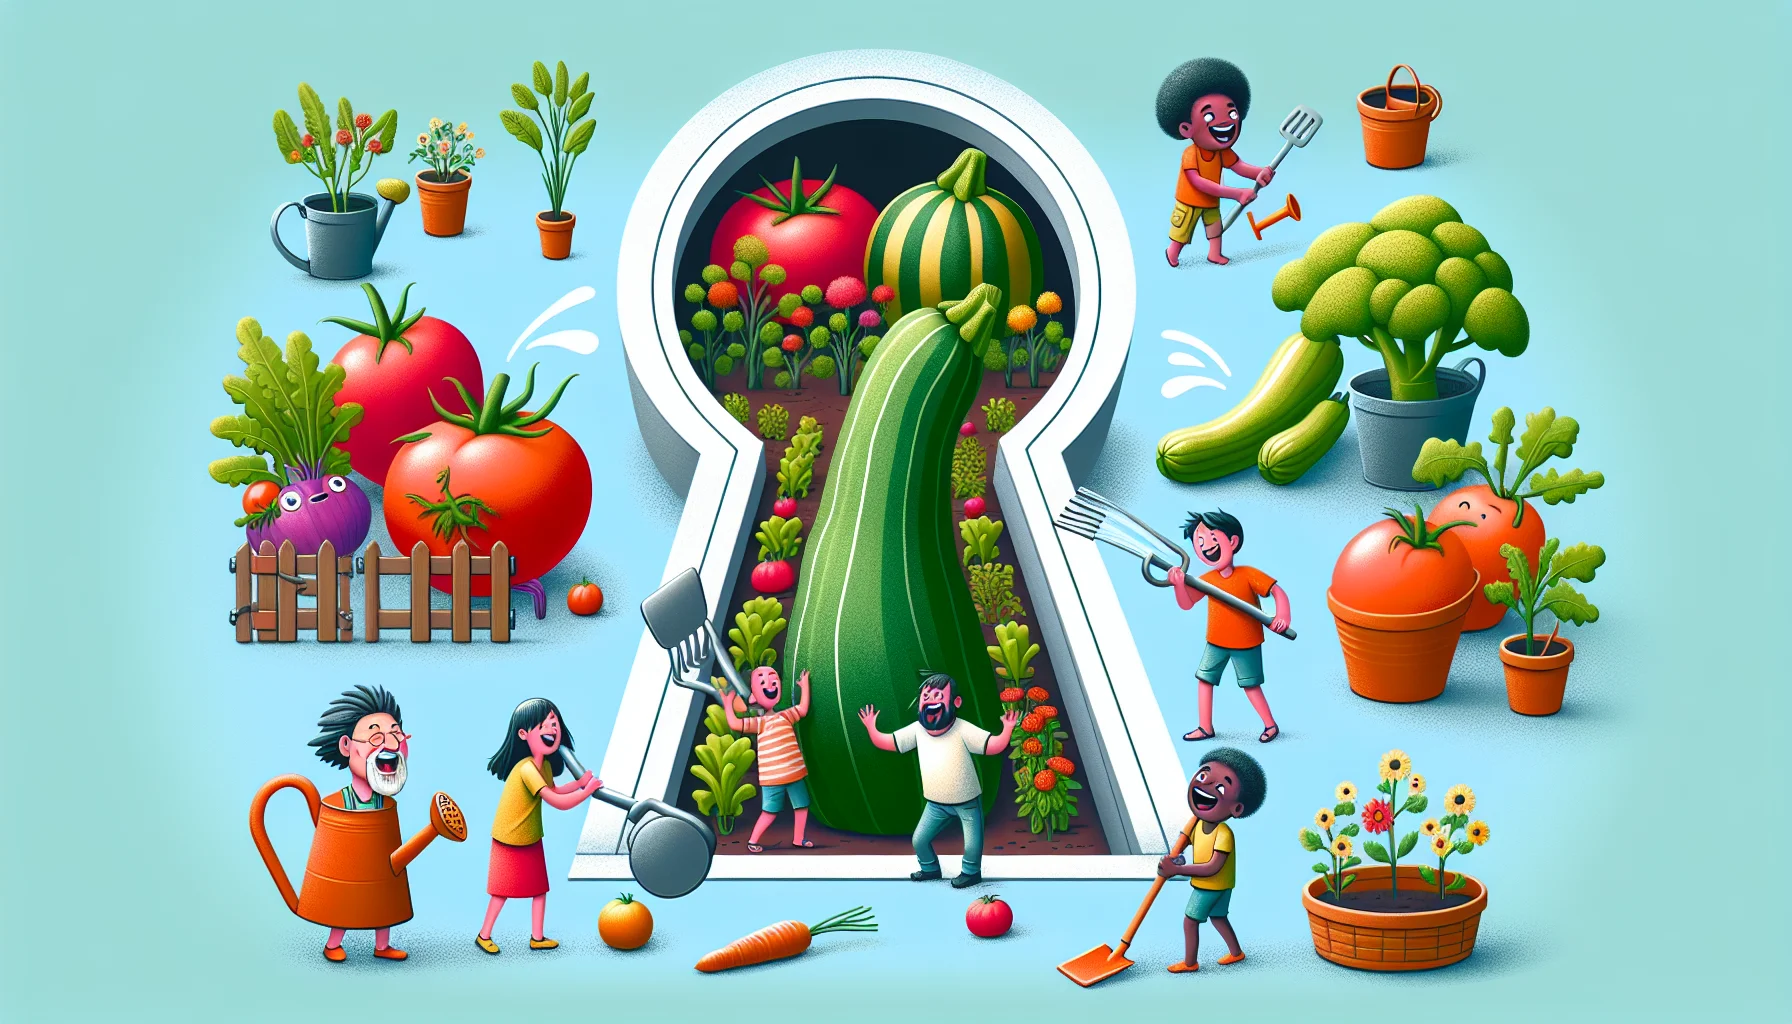 Imagine a creative scene of a keyhole garden. In this whimsical space, a range of vegetables like tomatoes, lettuce, and carrots grow wildly. In one funny scenario, a Chinese man is seen laughing as he unluckily stumbles over a zucchini. Nearby, a Mexican woman is amused while holding a huge, unusual-shaped tomato. African joyful kids are gleefully watering the plants with oversized watering cans. This unique size comparison adds to the humor. The overall scenario encourages an enjoyment of gardening, highlighting the freshness and diversity of homegrown foods all in the quirky layout of a keyhole garden design.